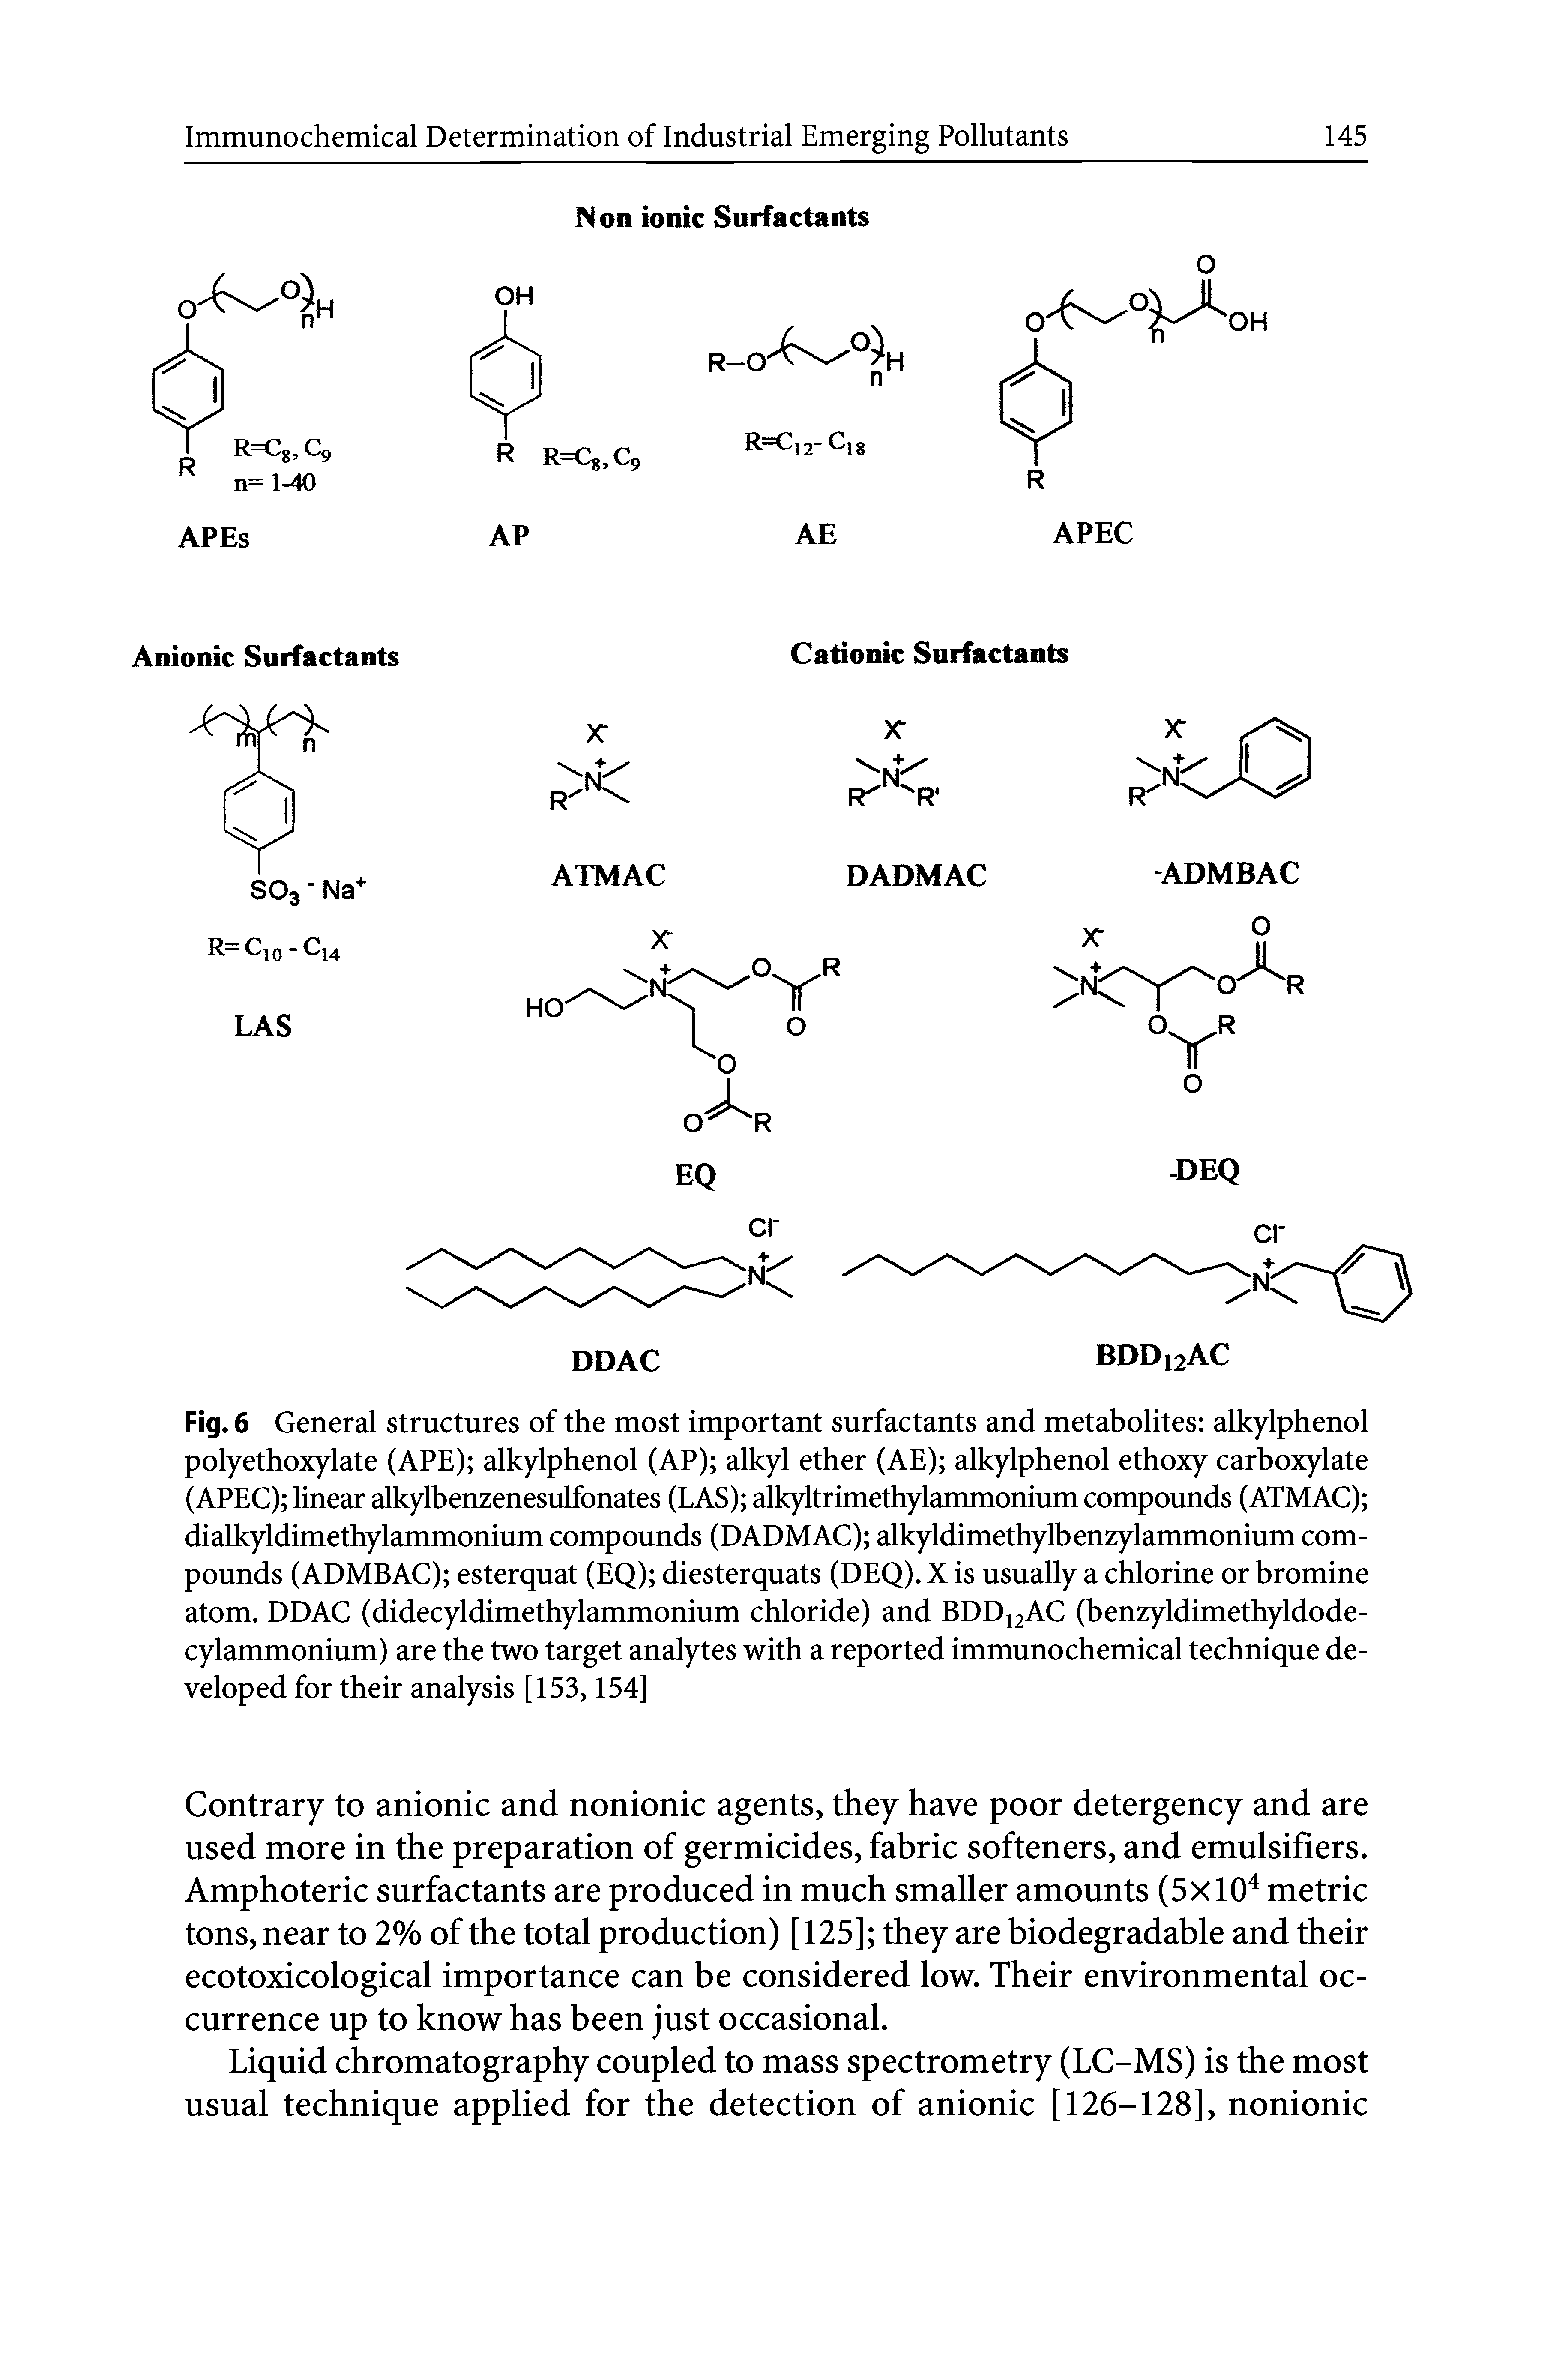 Fig. 6 General structures of the most important surfactants and metabolites alkylphenol polyethoxylate (APE) alkylphenol (AP) alkyl ether (AE) alkylphenol ethoxy carboxylate (APEC) linear alkylbenzenesulfonates (LAS) alkyltrimethylammonium compounds (ATMAC) dialkyldimethylammonium compounds (DADMAC) alkyldimethylbenzylammonium compounds (ADMBAC) esterquat (EQ) diesterquats (DEQ). X is usually a chlorine or bromine atom. DDAC (didecyldimethylammonium chloride) and BDD12AC (benzyldimethyldode-cylammonium) are the two target analytes with a reported immunochemical technique developed for their analysis [153,154]...